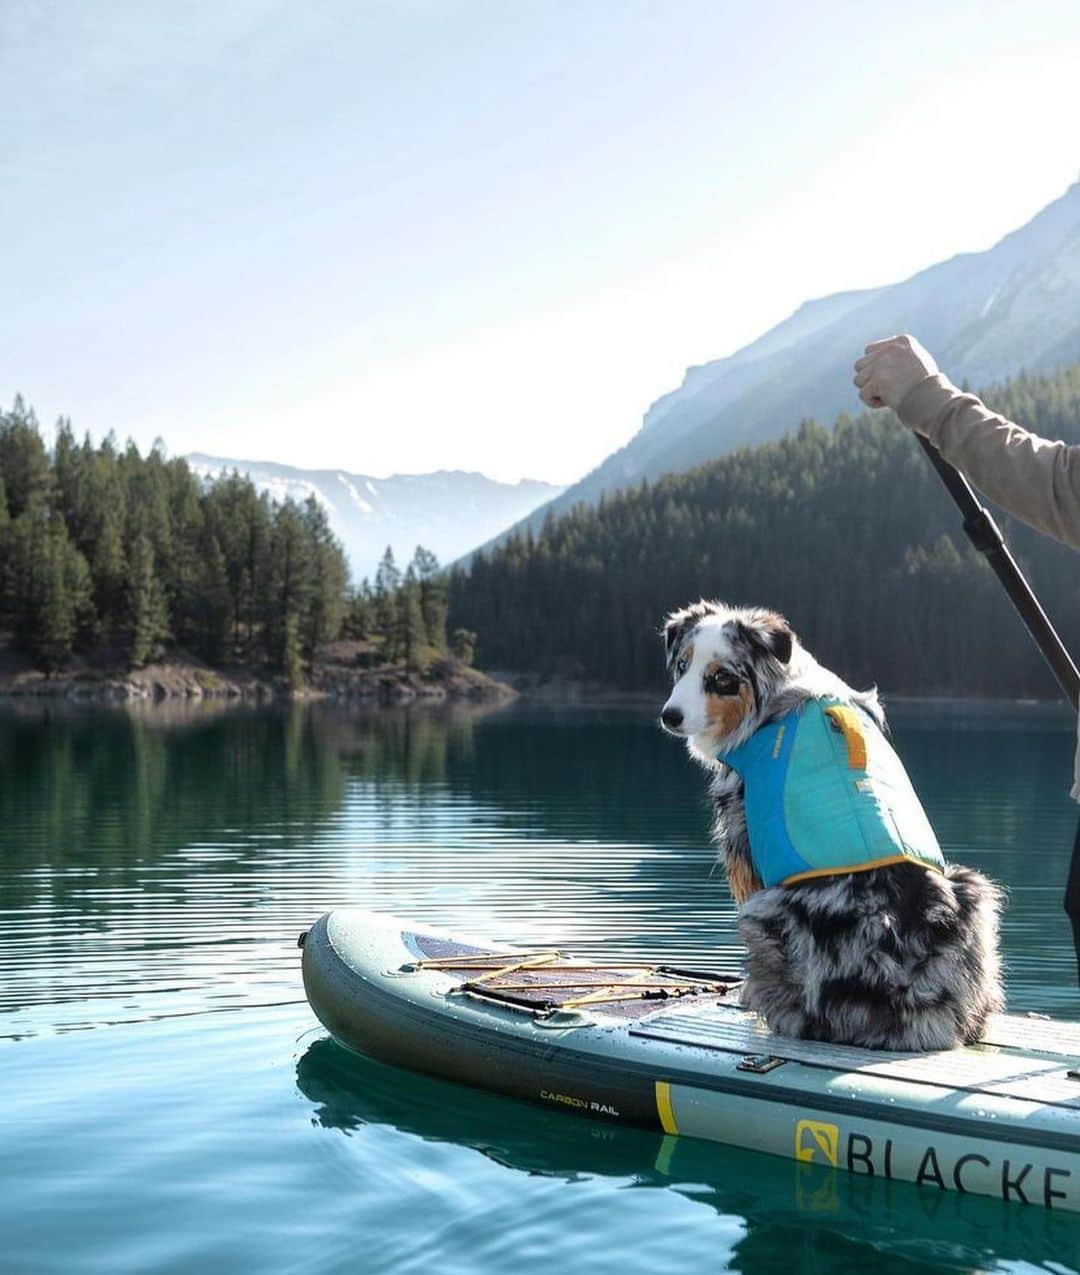 Bolt and Keelのインスタグラム：「There’s nothing better than a day at the lake 🏔️ 🐾 🌊  @adventrapets ➡️ @carl.explores  —————————————————— Follow @adventrapets to meet cute, brave and inspiring adventure pets from all over the world! 🌲🐶🐱🌲  • TAG US IN YOUR POSTS to get your little adventurer featured! #adventrapets ——————————————————」